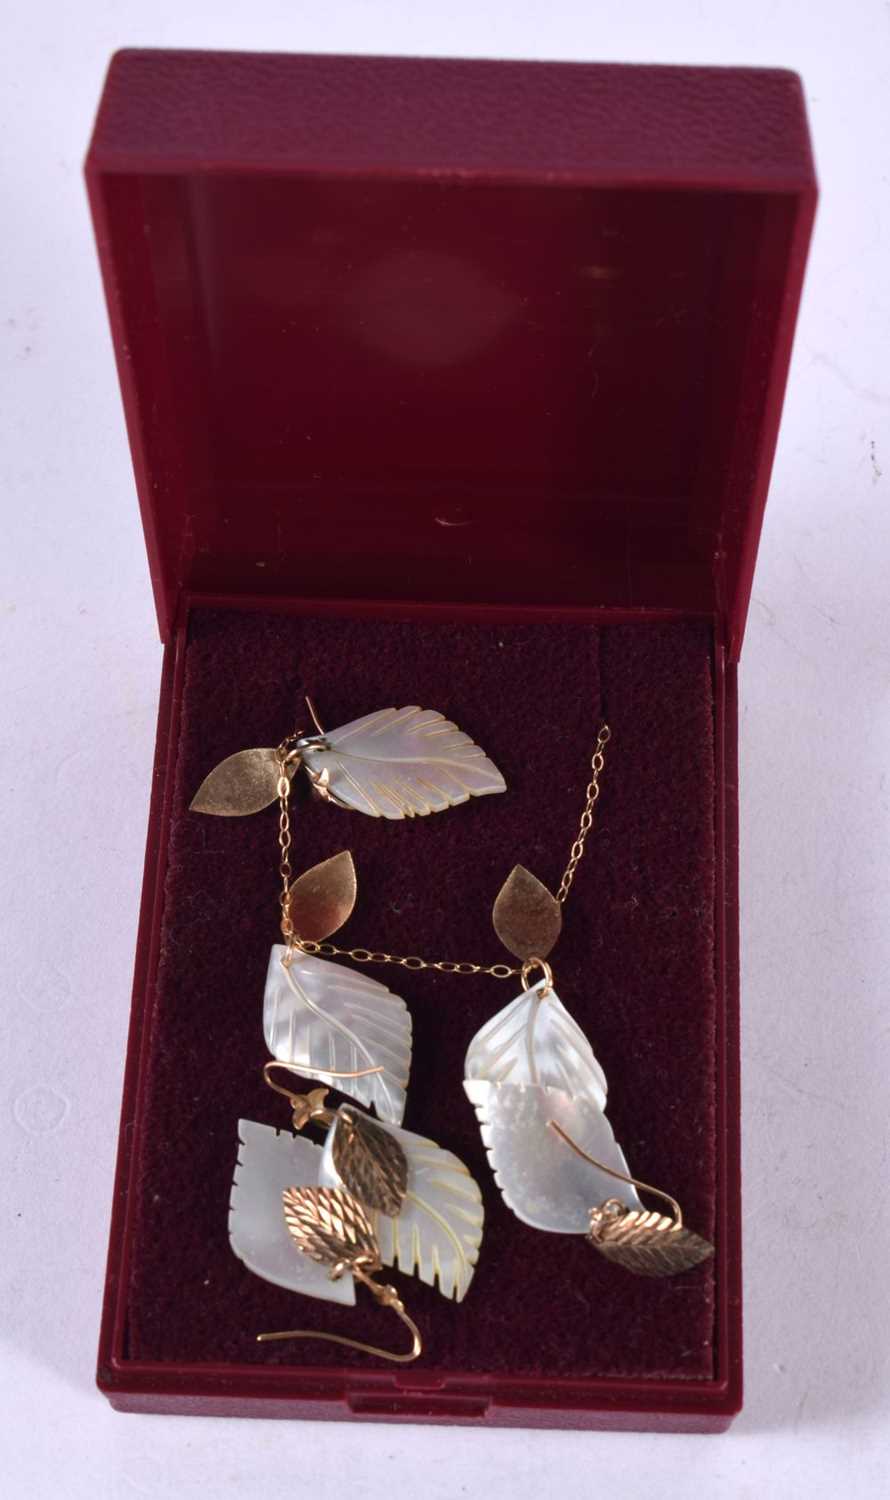 A MOTHER OF PEARL LEAF NECKLACE WITH 2 PAIRS OF MATCHING EARRINGS. Pendant 2.3cm, Chain 39cm,